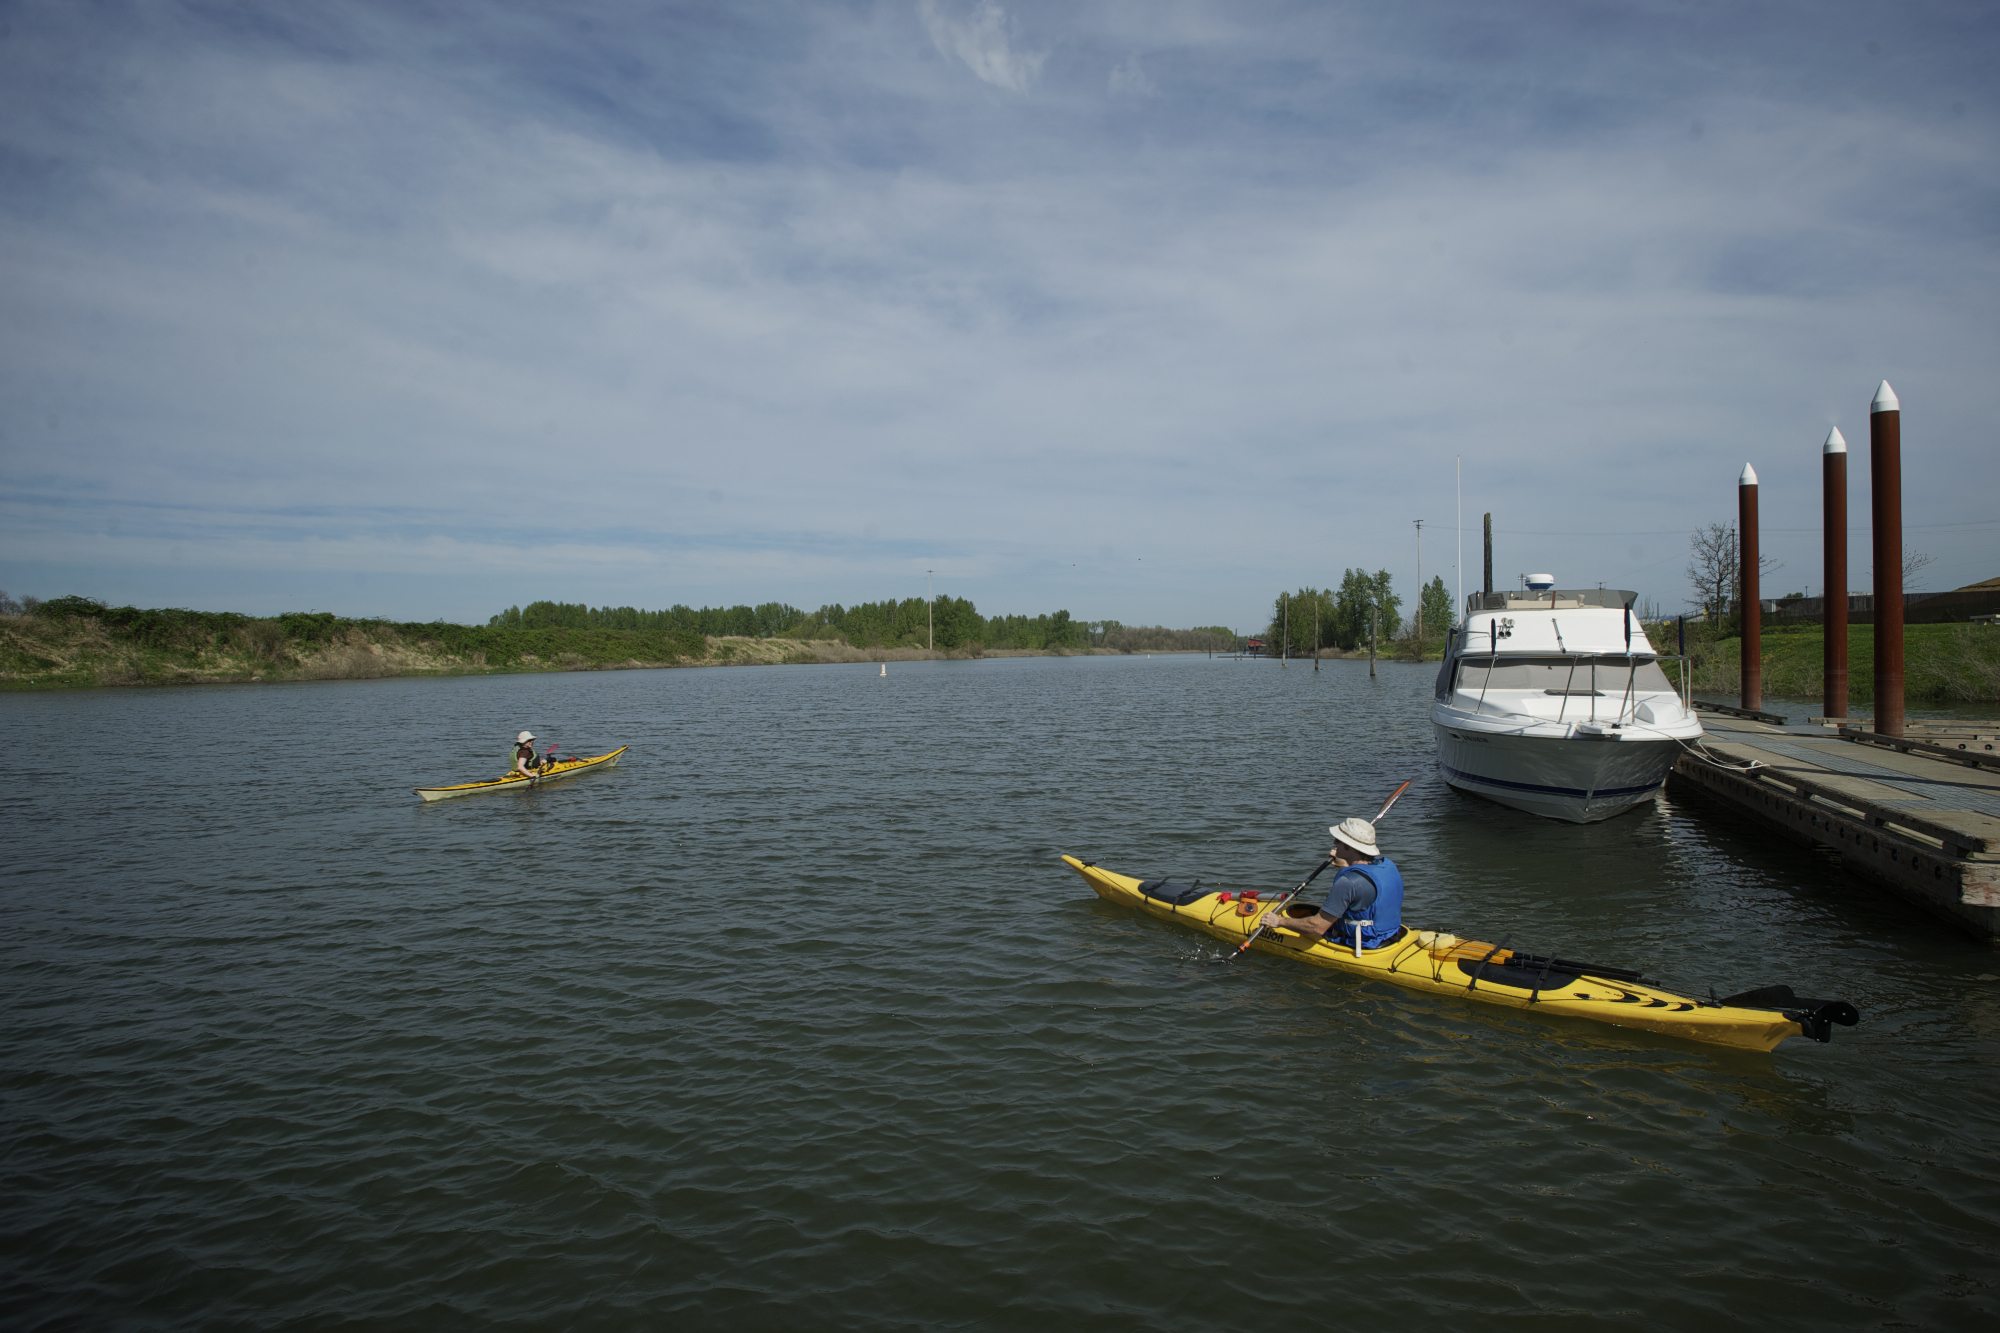 Michele Megregian, left, and her husband, Ryan Allen, of Portland, start off on a short kayak trip Monday at the Port of Ridgefield.